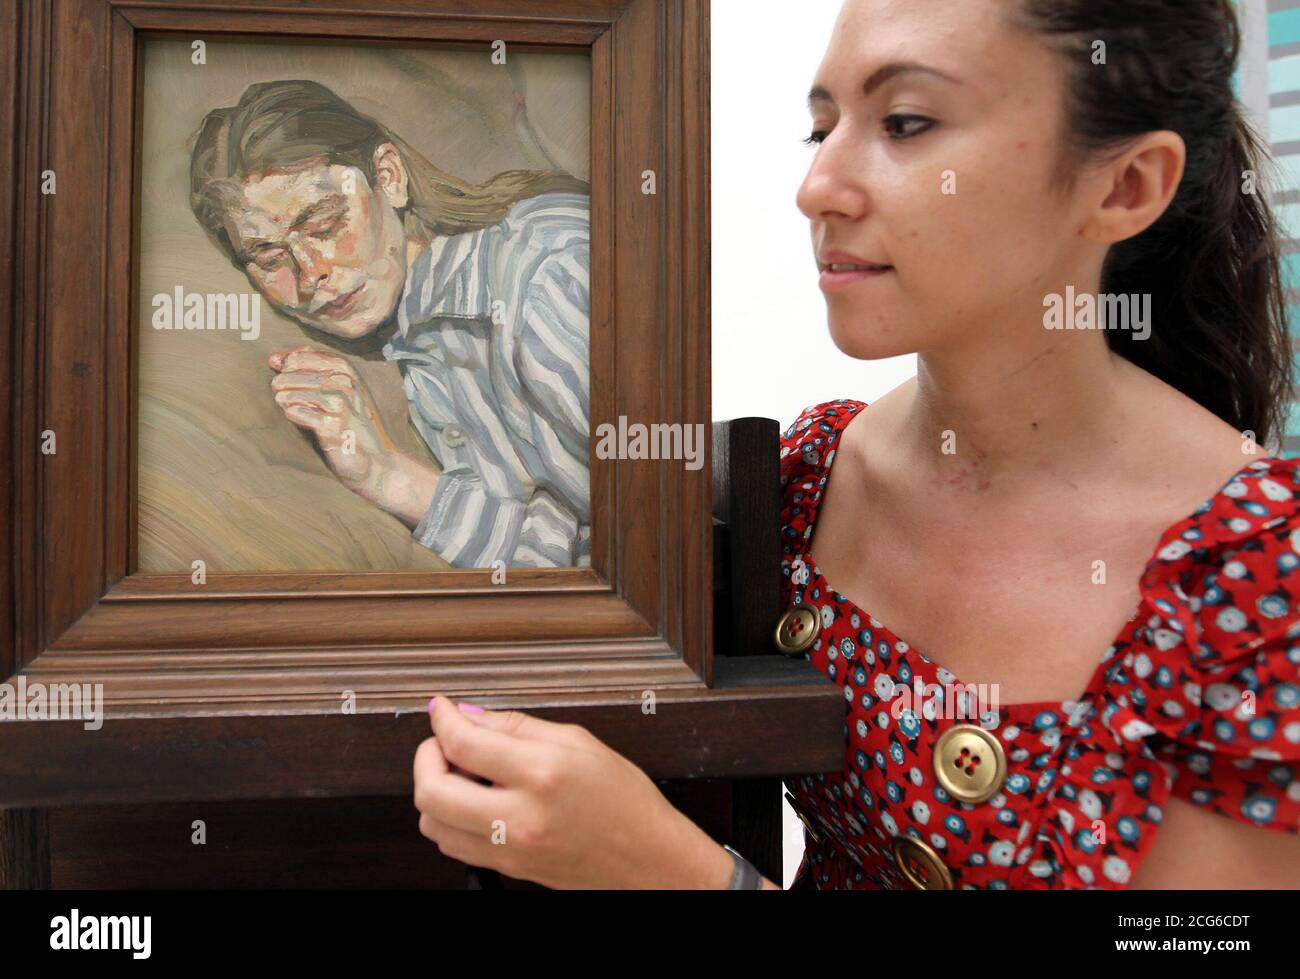 Alexandra Jacobs at Tate Britain, London, looking at the Girl In A Striped Nightdress by Lucian Freud, one of the nine works of art presented to the Tate by philanthropists Mercedes and Ian Stoutzker. Stock Photo